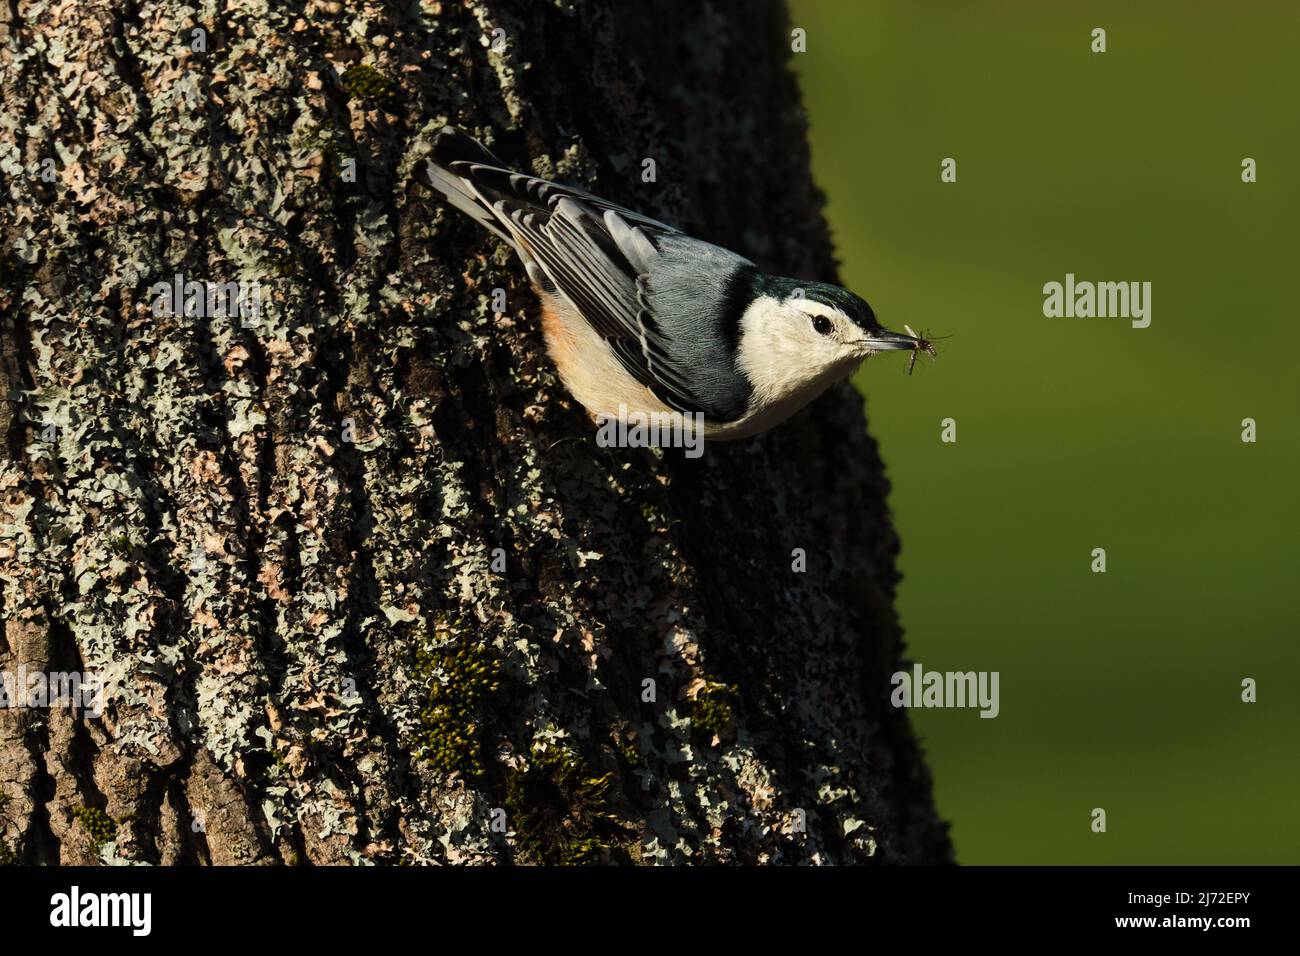 White-breasted Nuthatch, Sitta carolinensis. perched on tree trunk after catching a mosquito in its beak Stock Photo